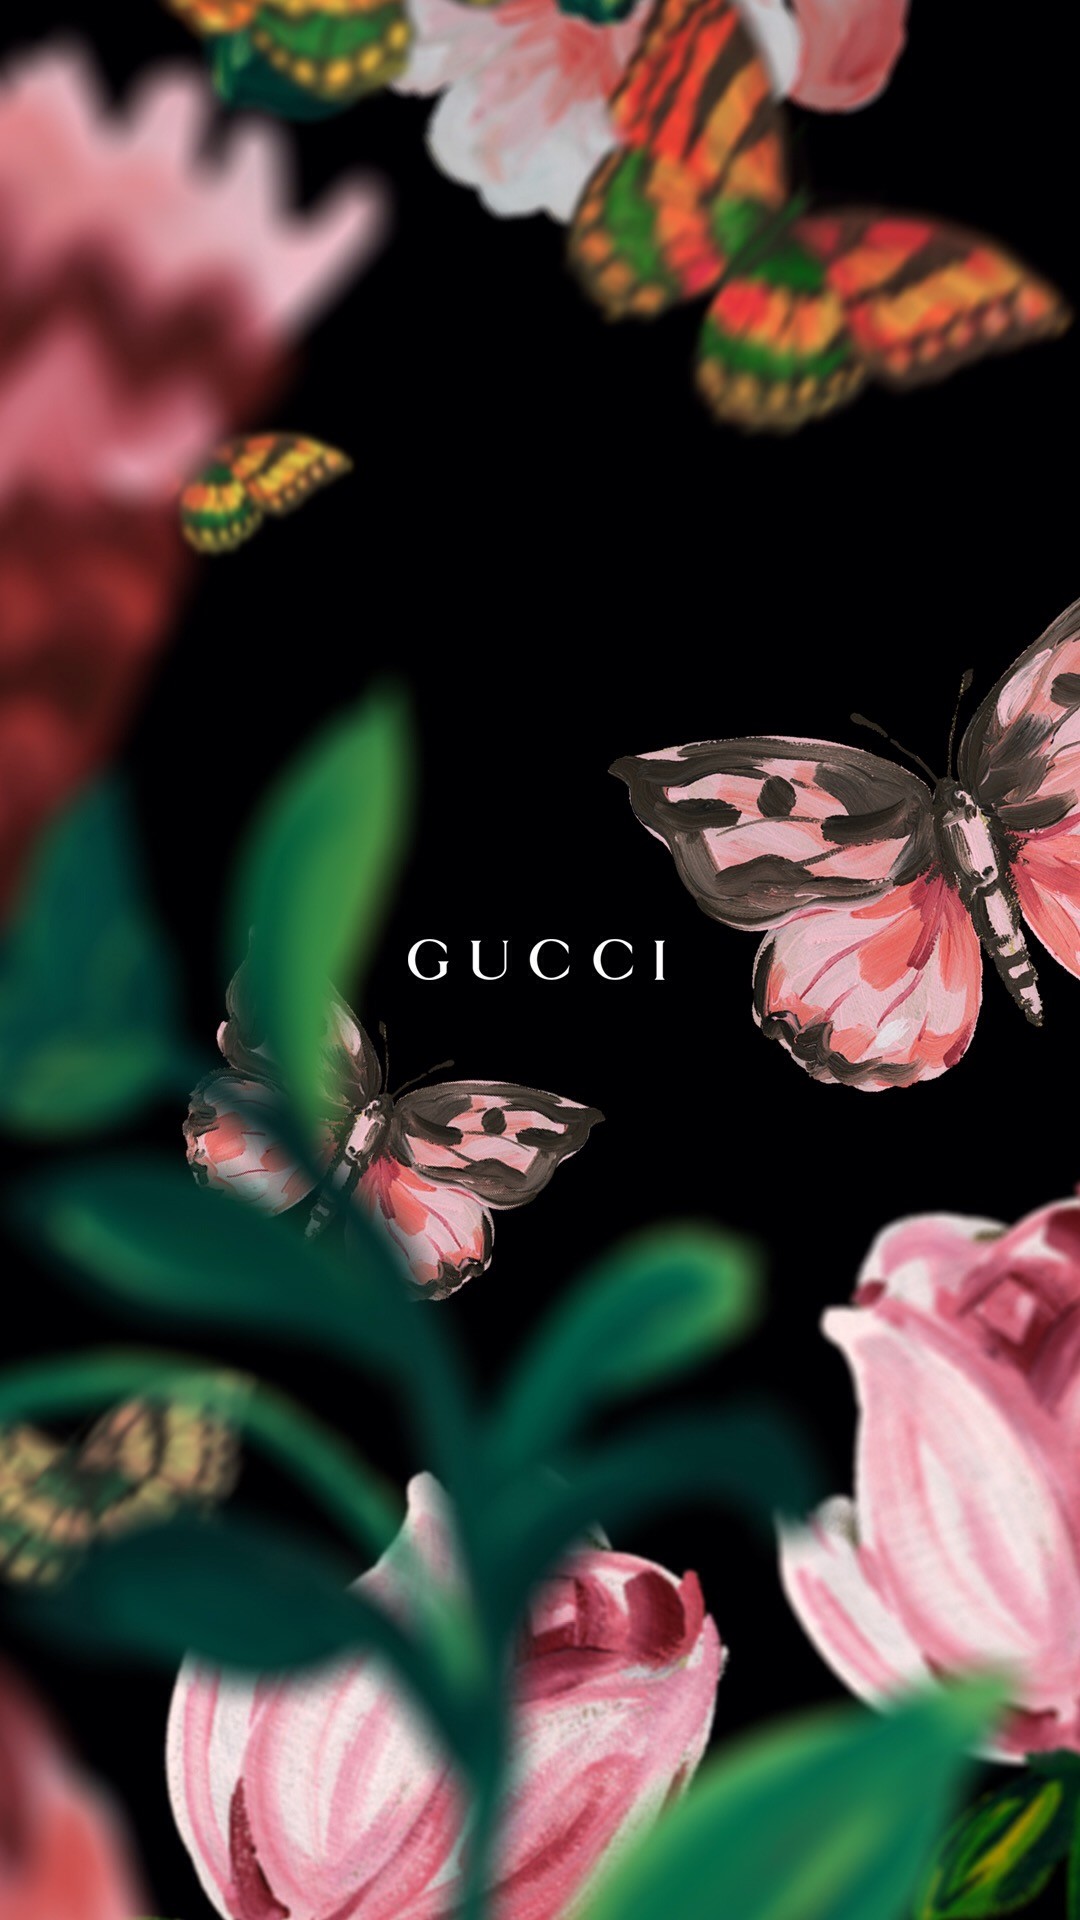 1080x1920 Gucci wallpaper from their app